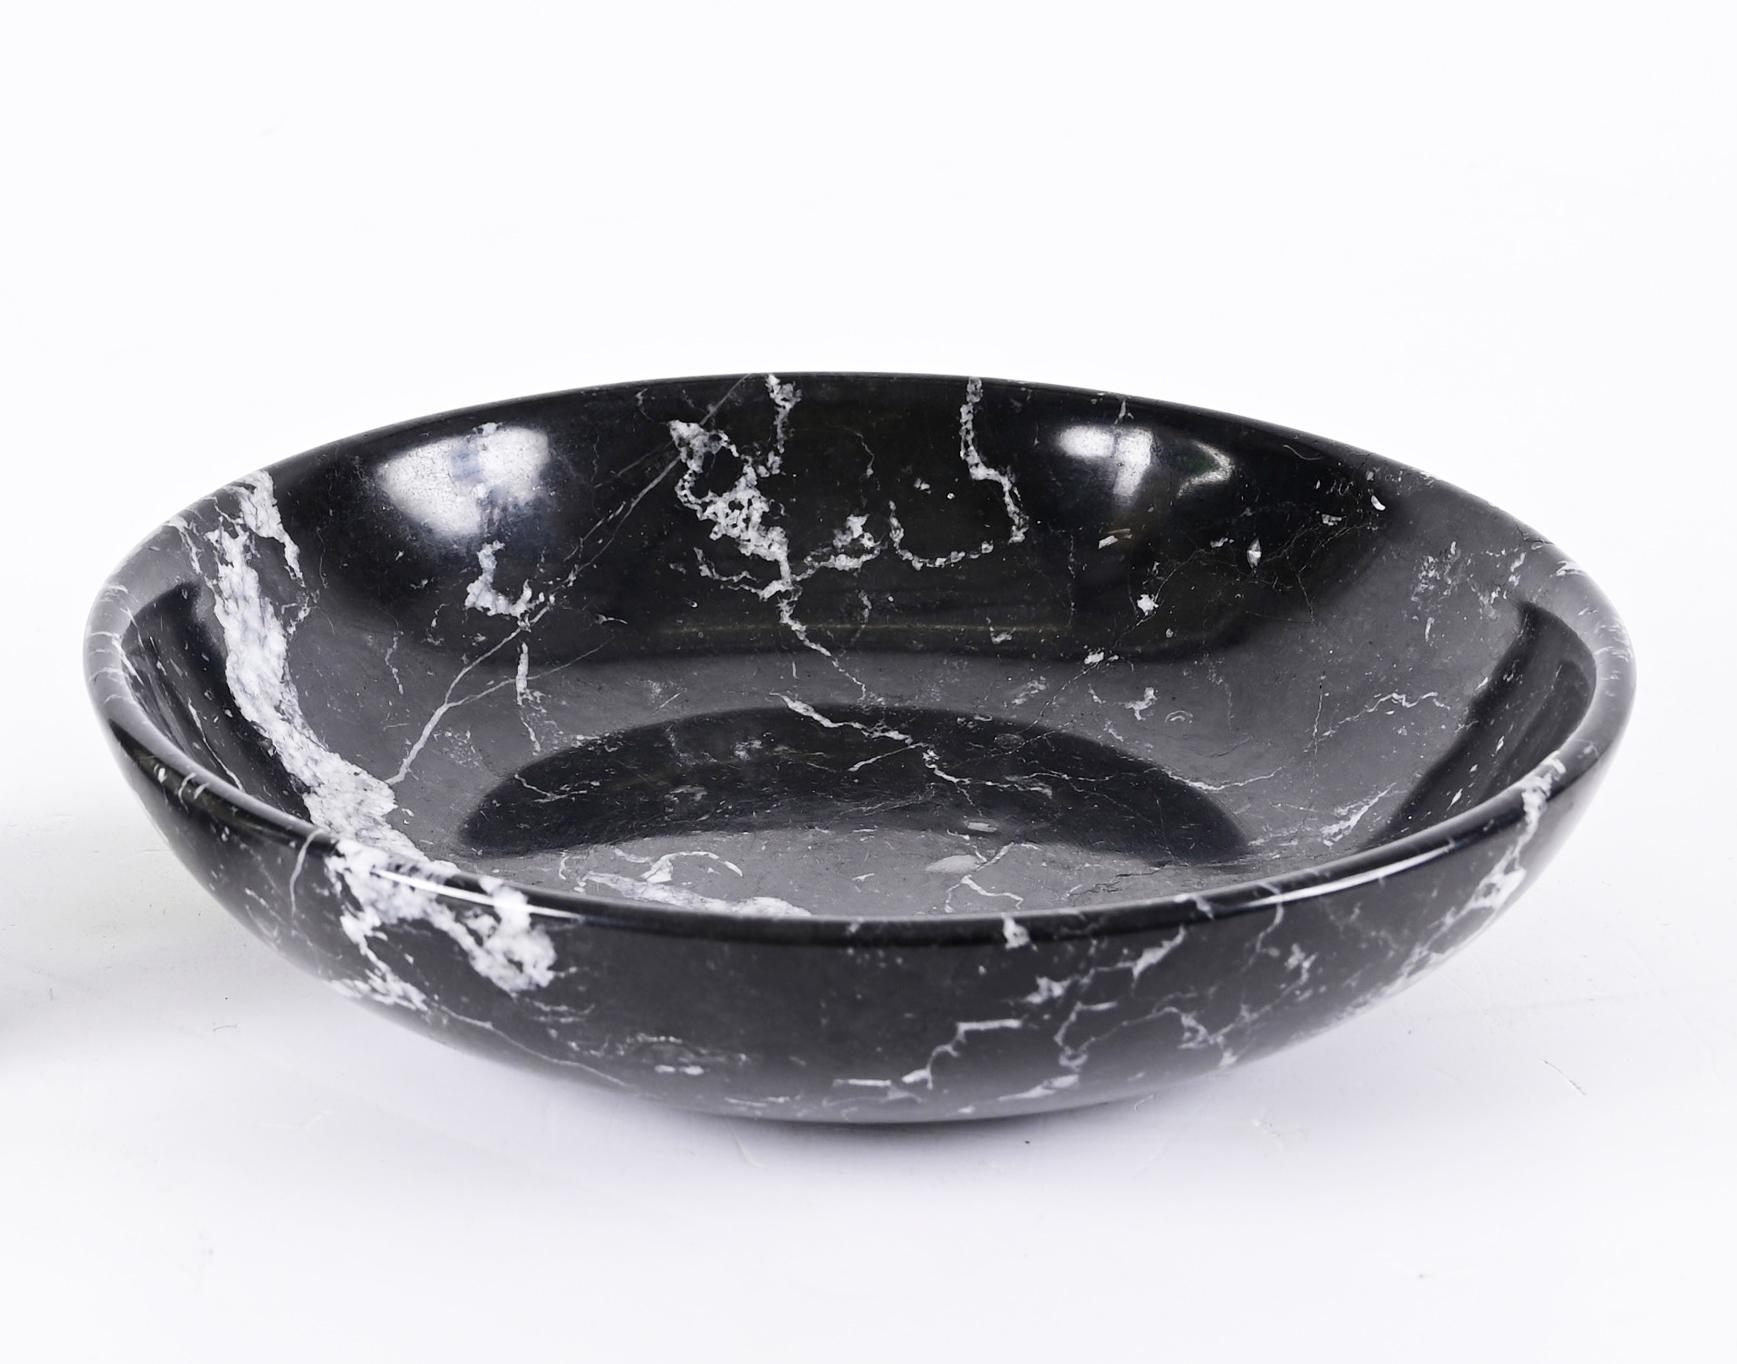 Mid-Century Modern Midcentury Black Marble with White Grains Round Italian Decorative Bowl, 1950s For Sale